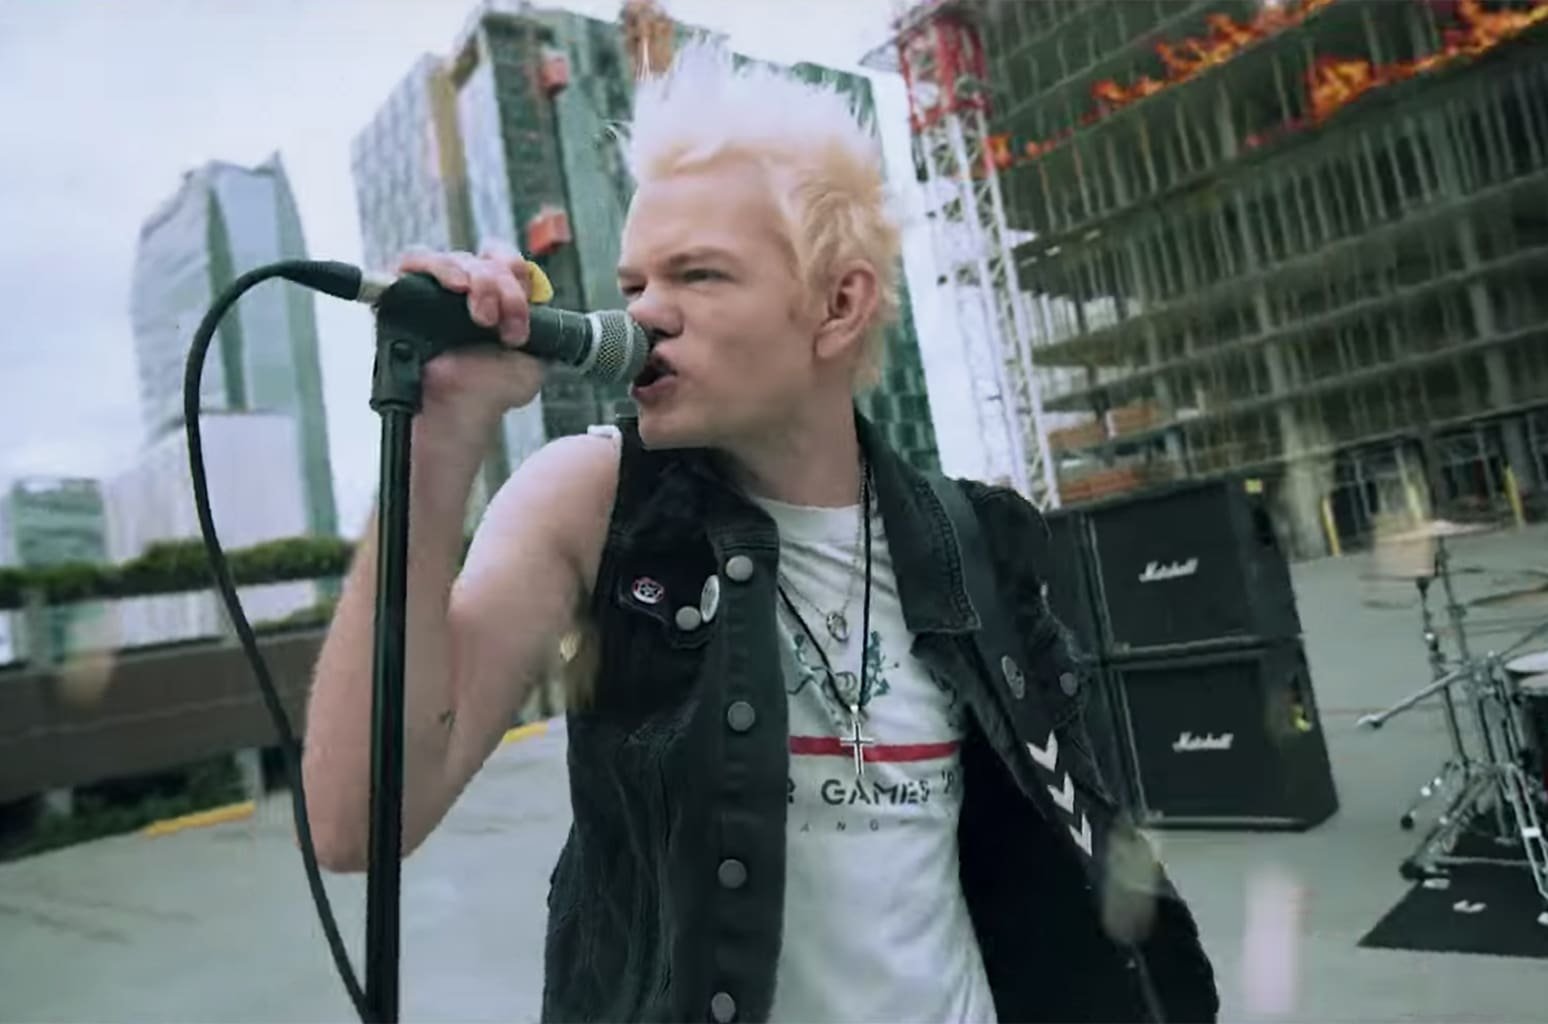 Deryck Whibley in "Fake My Own Death"/©Hopeless Records